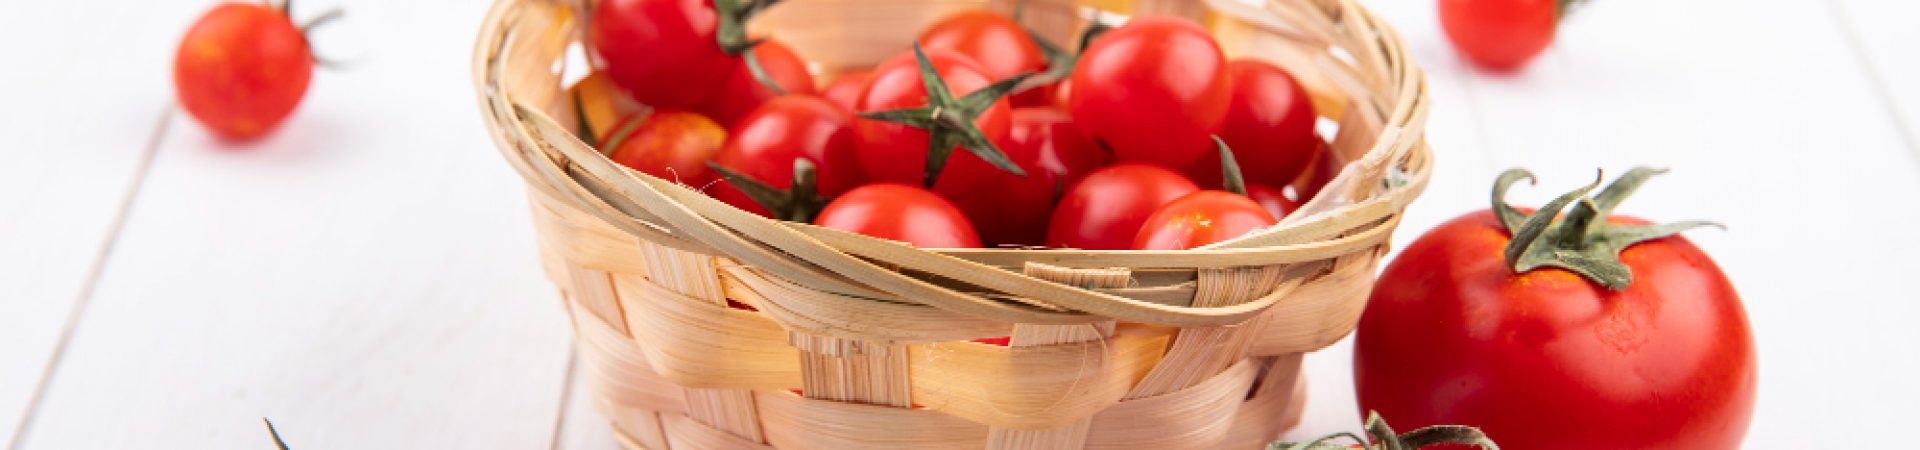 side-view-tomatoes-basket-wood